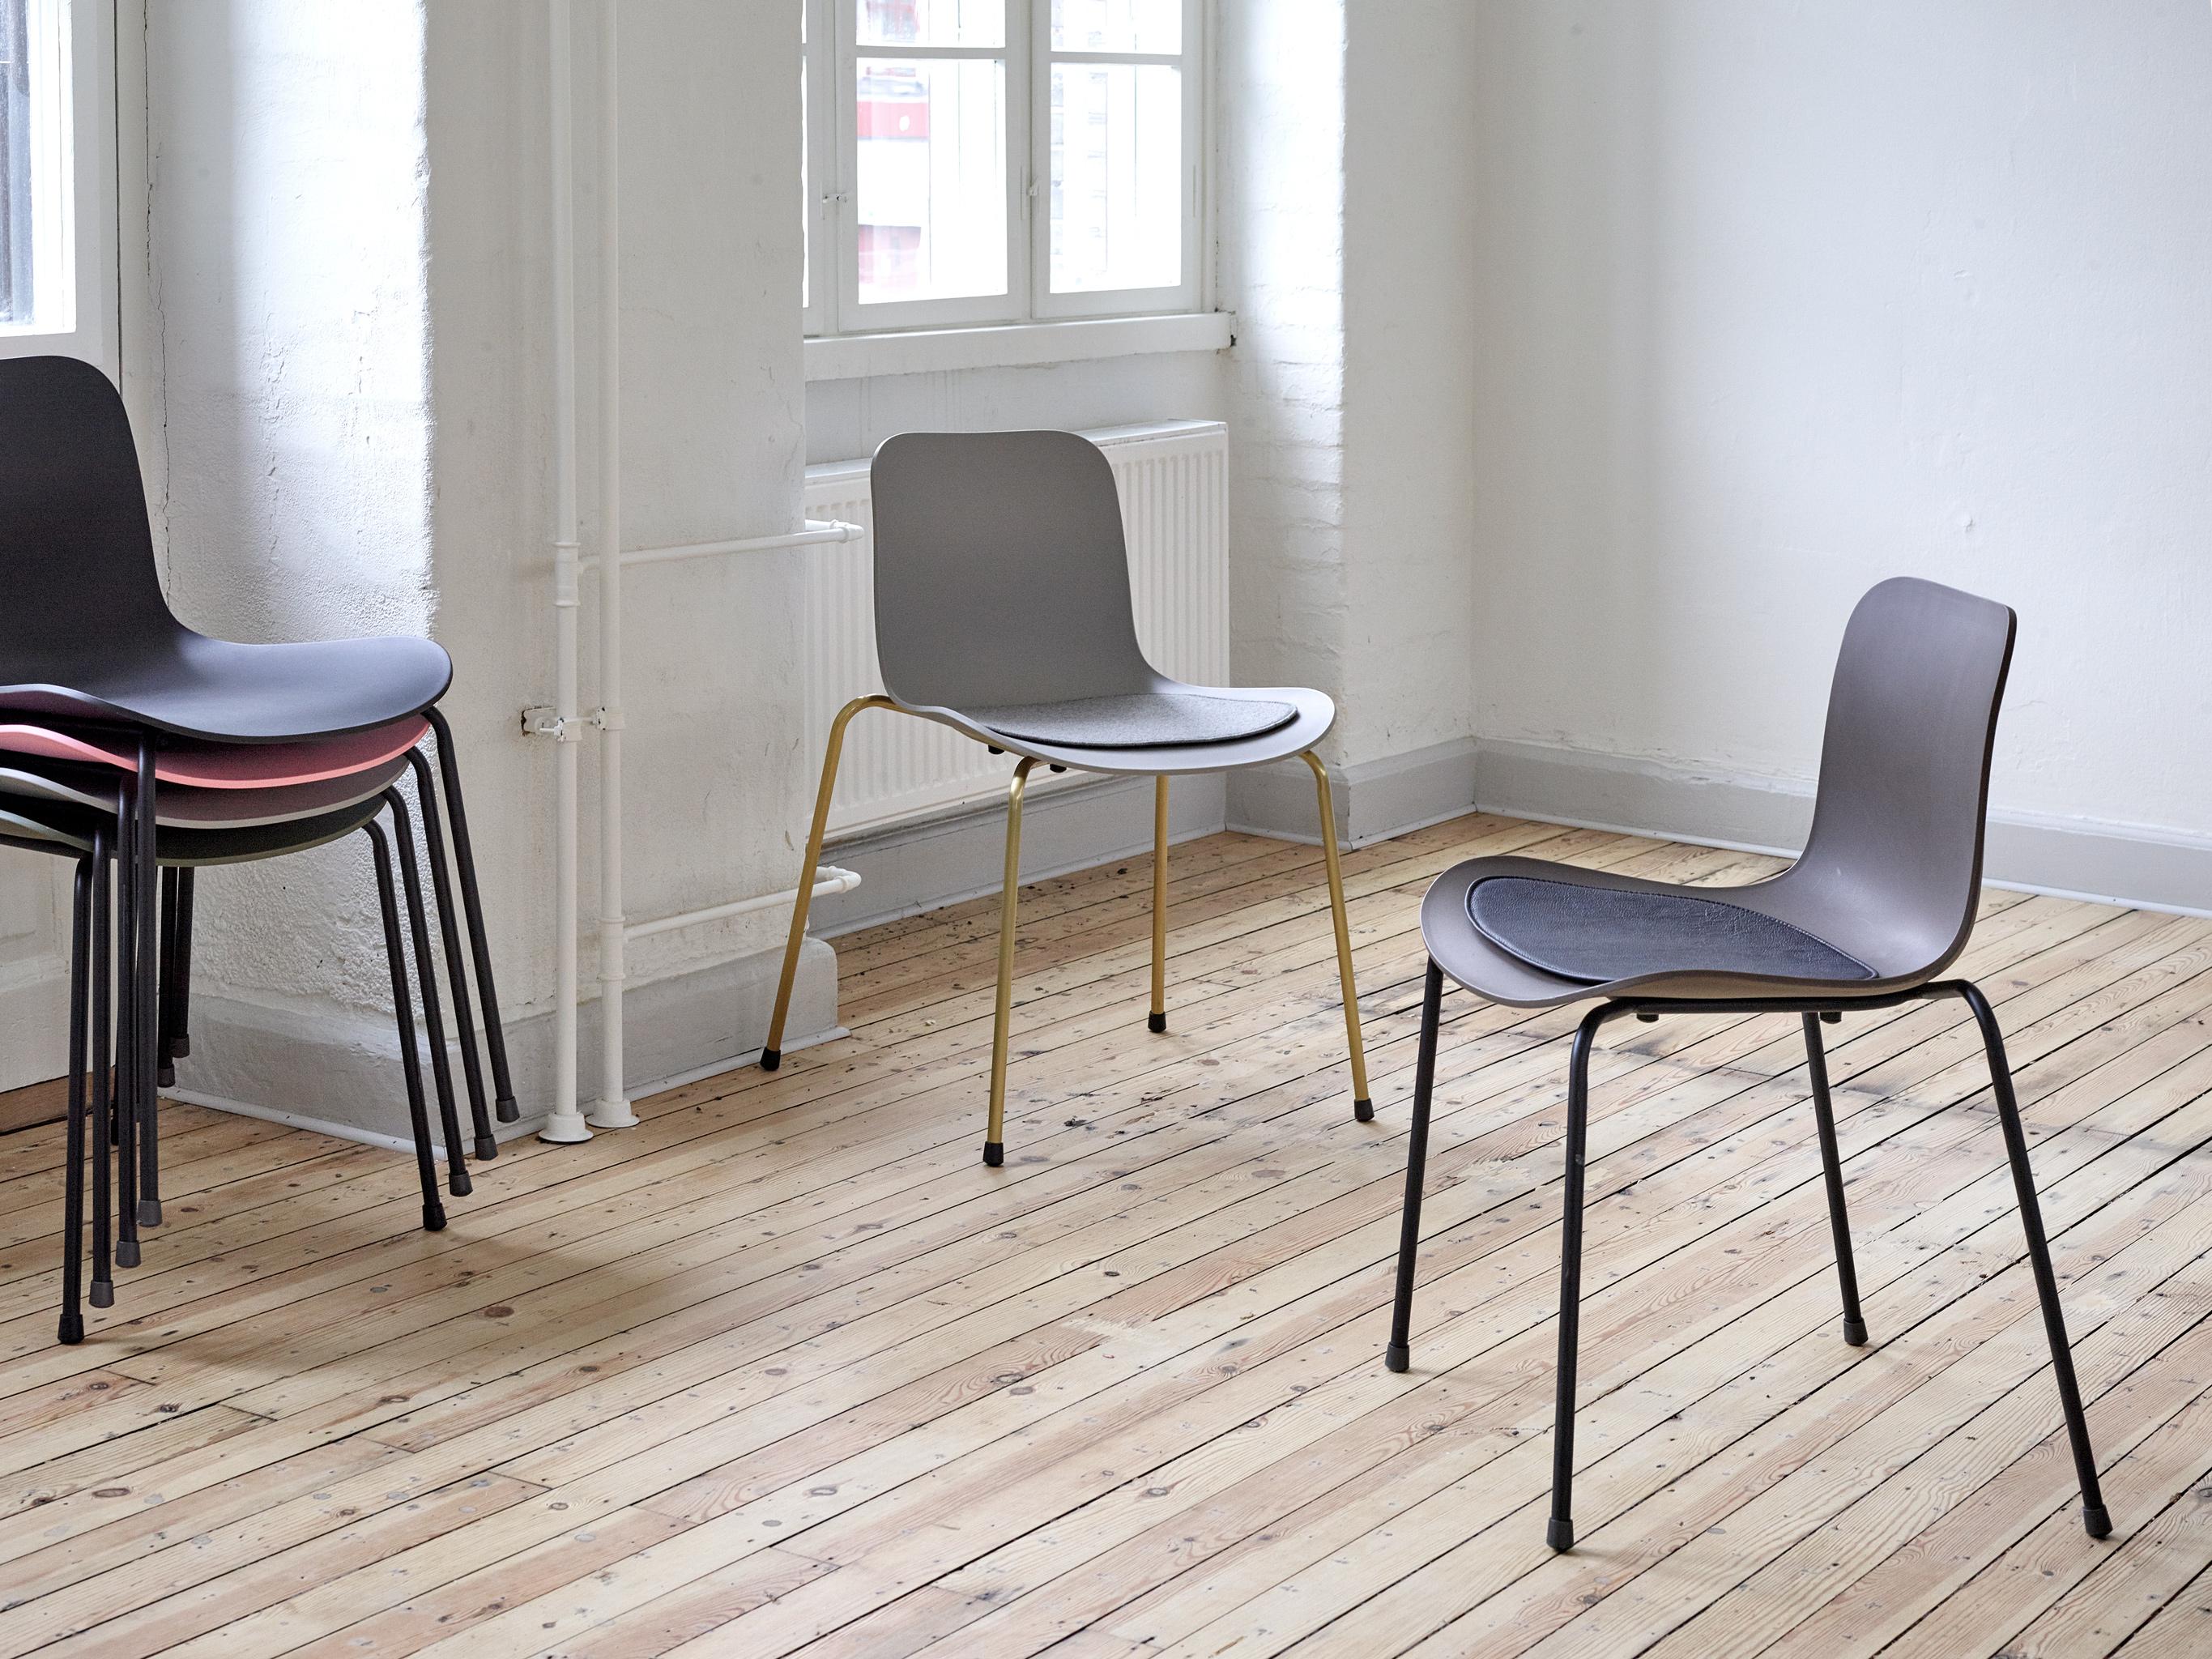 Langue Steel Chair by NORR11
Dimensions: D 52 x W 58 x H 79 cm. SH 47.
Materials: Steel, polypropylene and upholstery.
Upholstery: Barnum Bouclé Col. 11.

The legs are made of steel. The seating shell is made of Polypropylene. Soft upholstery: 3 cm